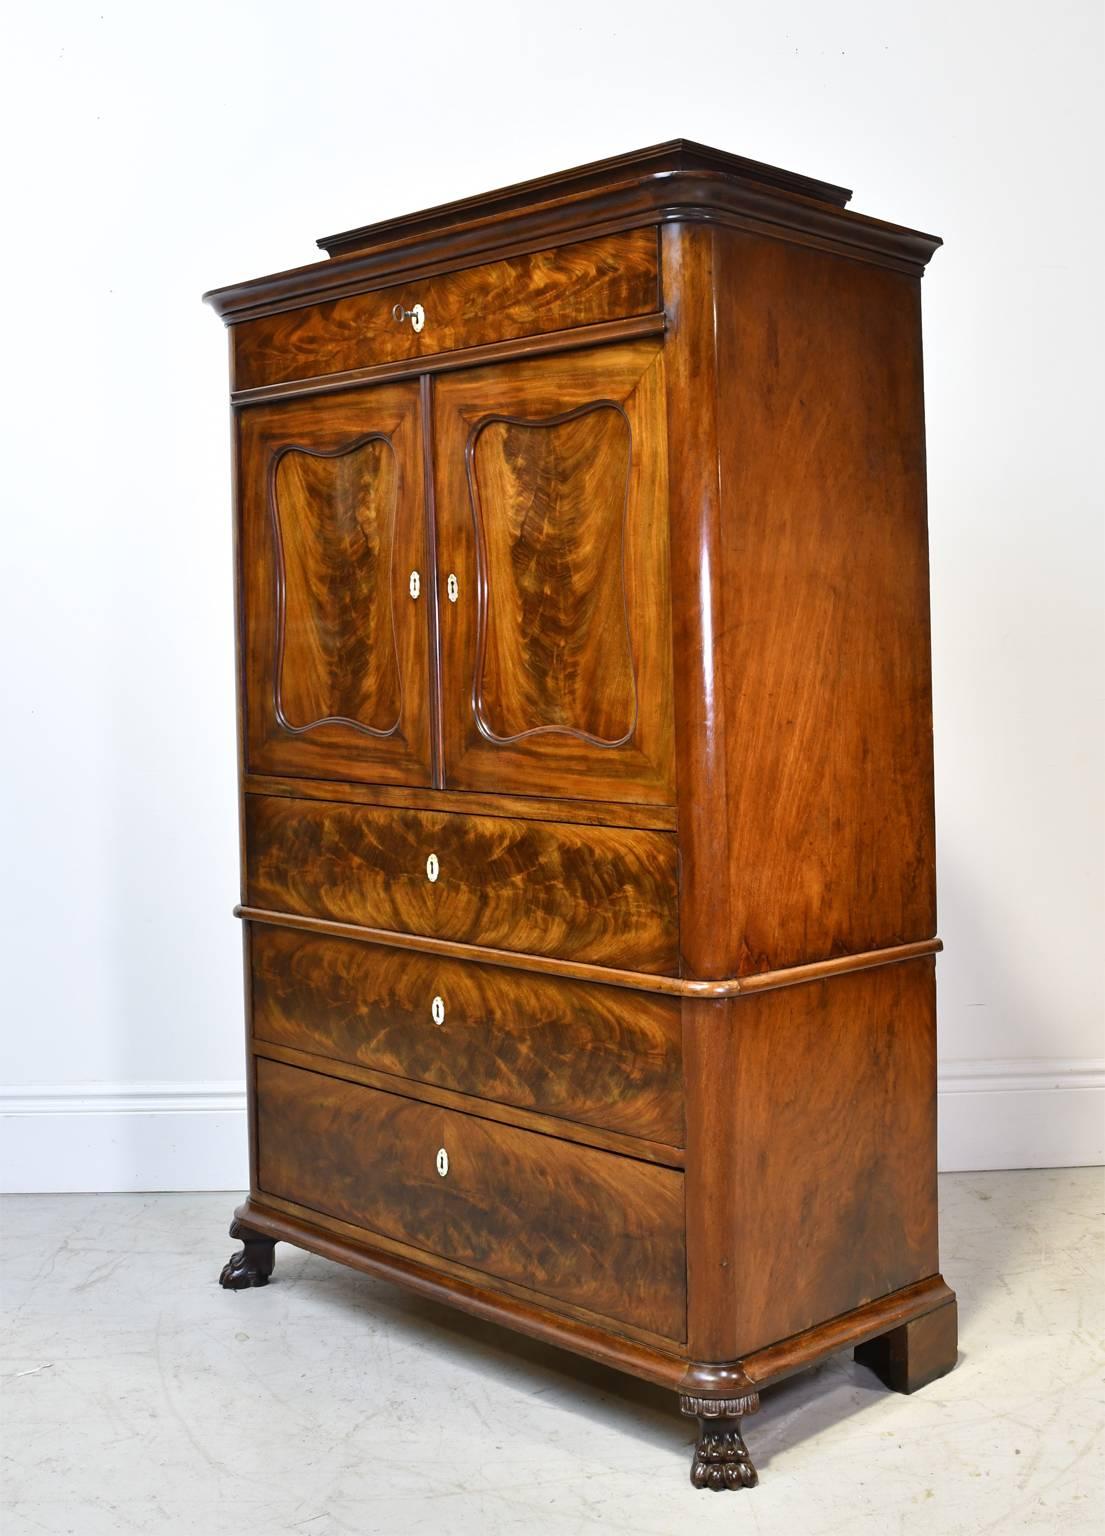 A very handsome Biedermeier silver or liquor chest in book-matched flame mahogany. Denmark, circa 1835. Features a pedestal top over a single drawer followed by cabinet doors that open to an open storage area with three small interior drawers. The